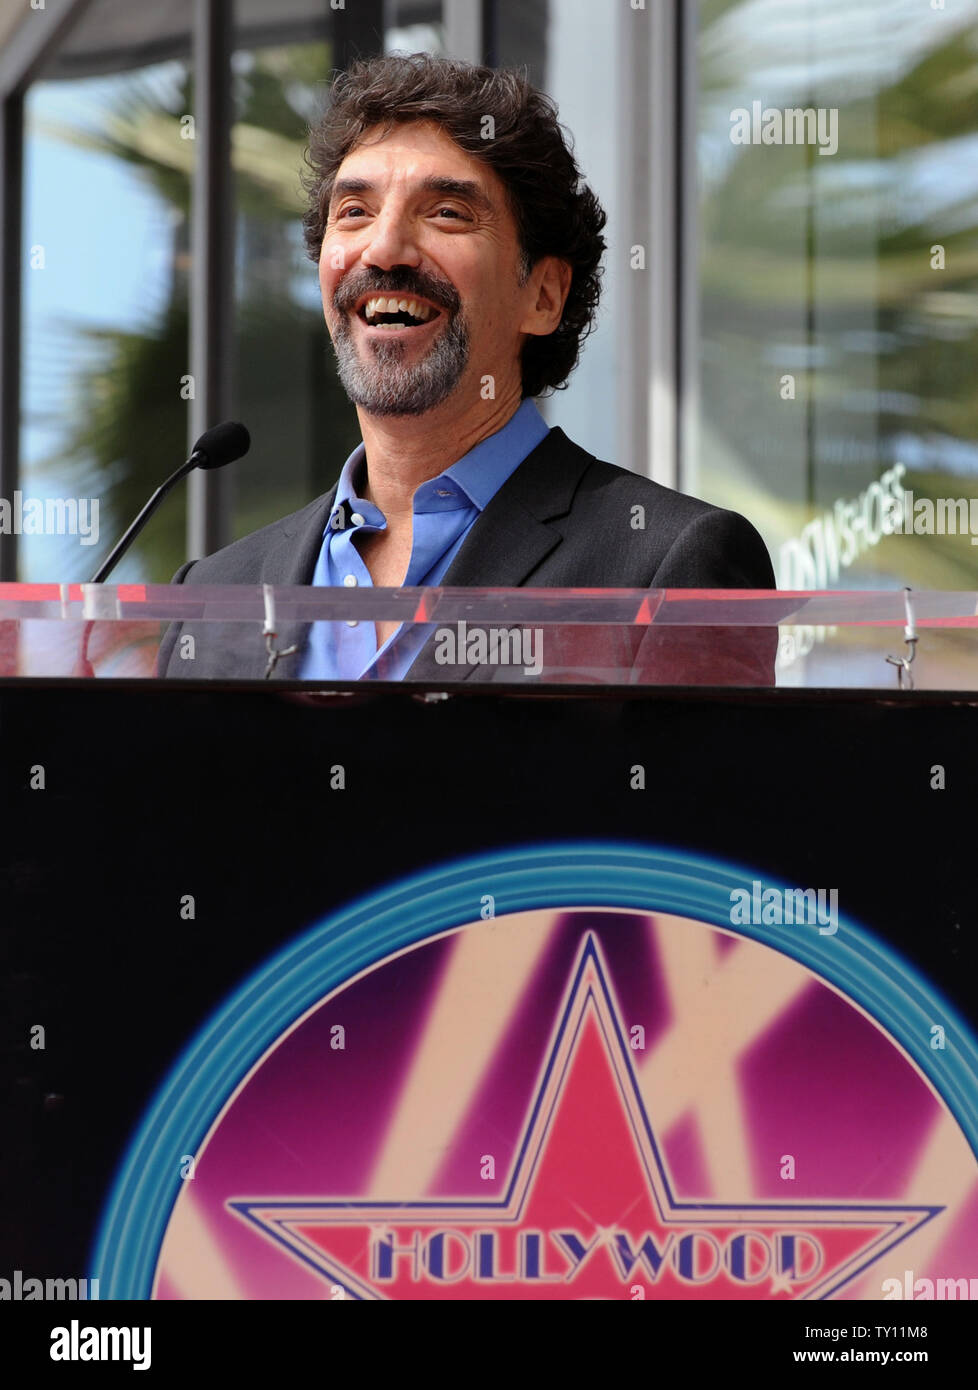 Chuck Lorre shares a light moment during ceremonies honoring him with the 2,380th star on the Hollywood Walk of Fame in Los Angeles on March 12, 2009. Lorre produces and co-created CBS' 'The Big Bang Theory' and 'Two and Half Men'. He also produced 'Dharma & Greg'' and 'Grace Under Fire'. (UPI Photo/Jim Ruymen) Stock Photo